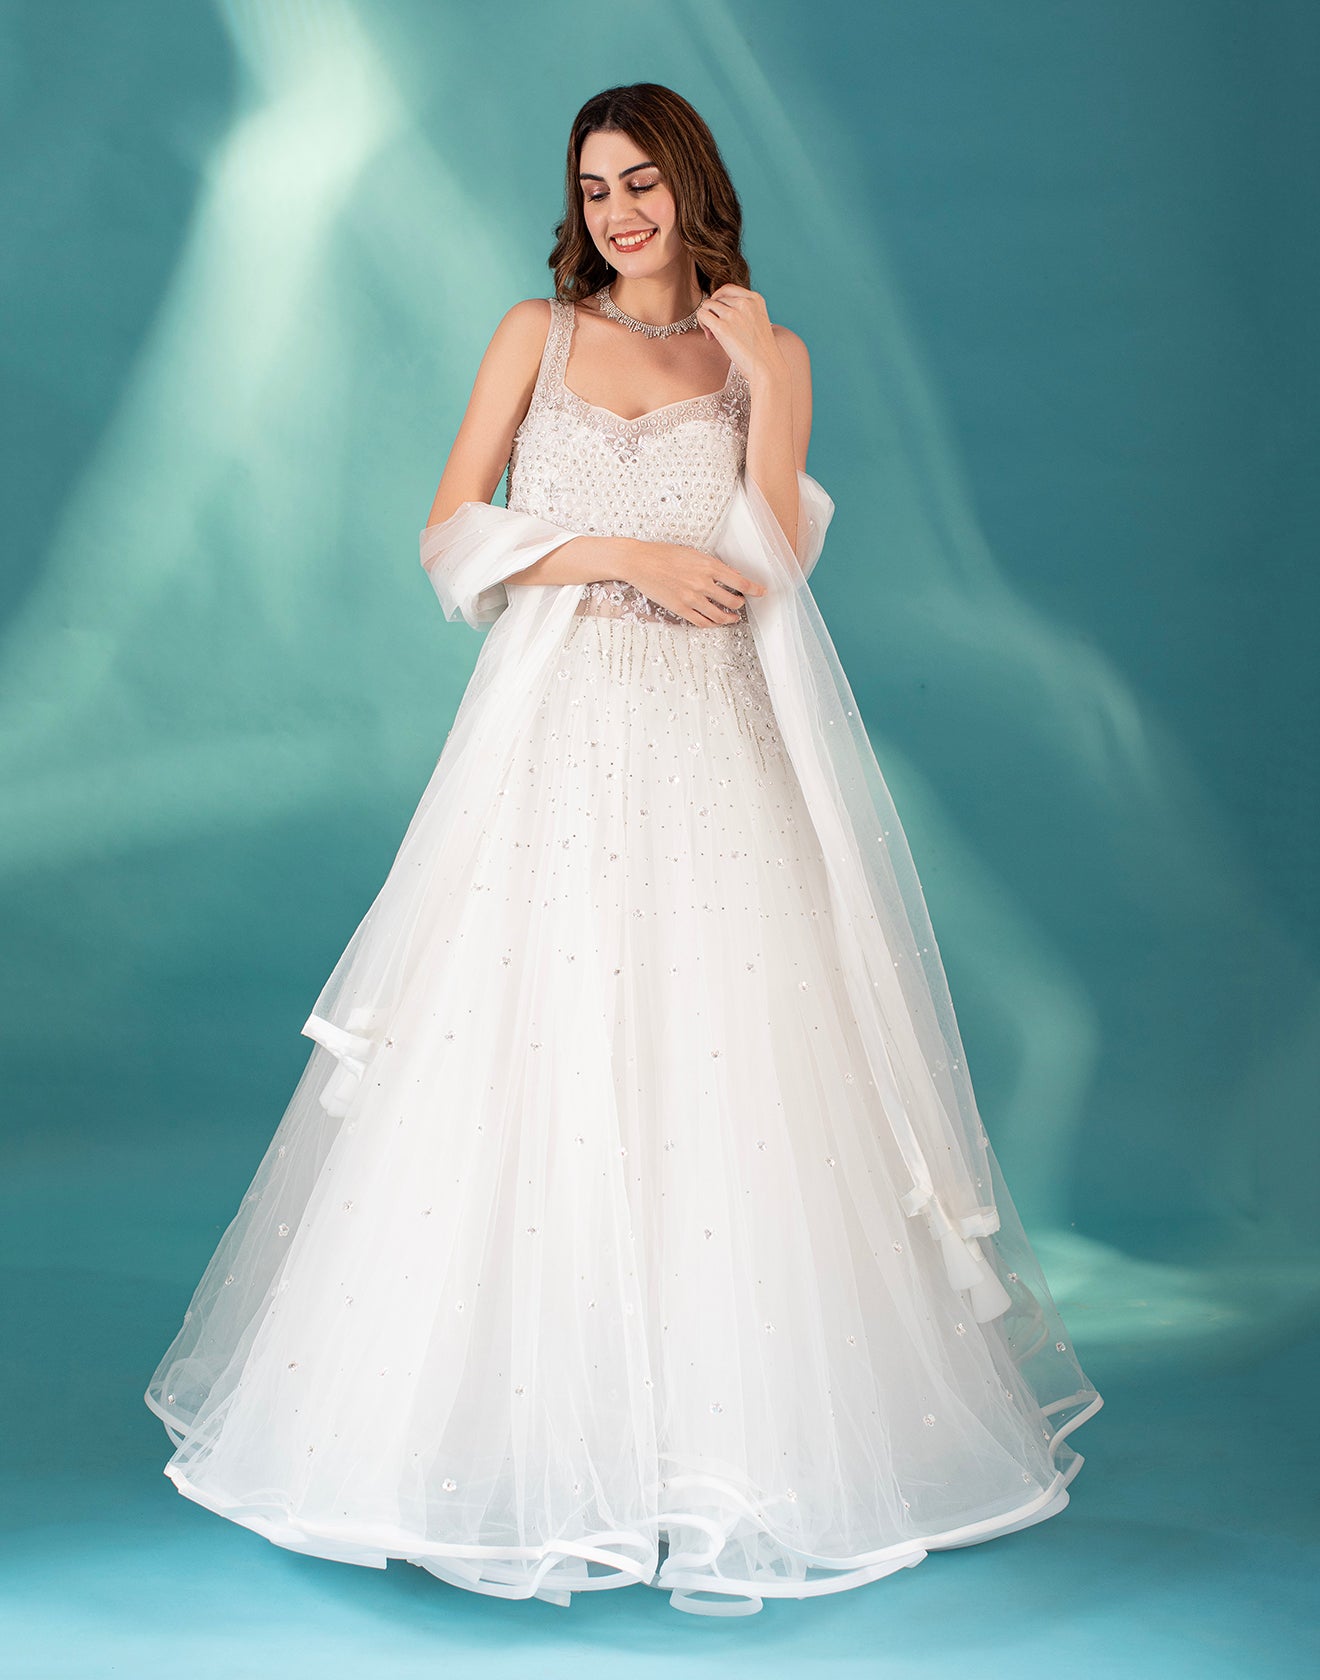 Dove White Embellished Cocktail Gown